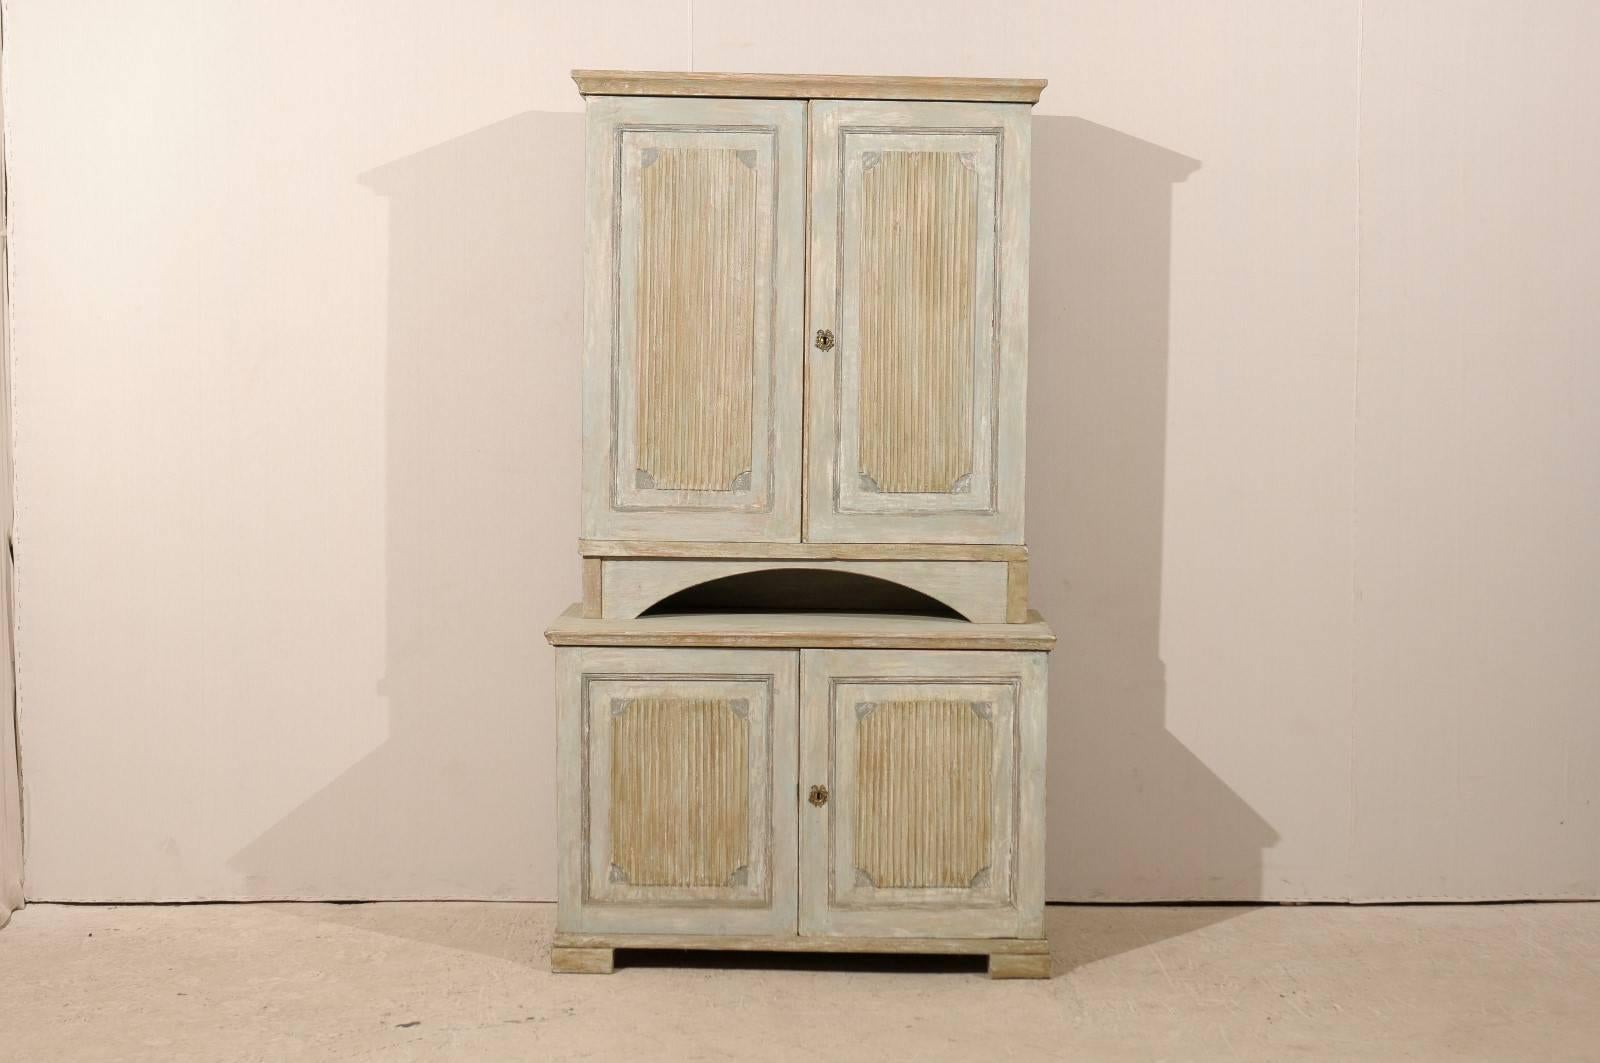 A Swedish 19th century period Gustavian painted wood cabinet with receded doors and block feet. This Swedish cabinet features two doors in the upper section, opening to multiple inner shelves. An opened arched section separates the top from the